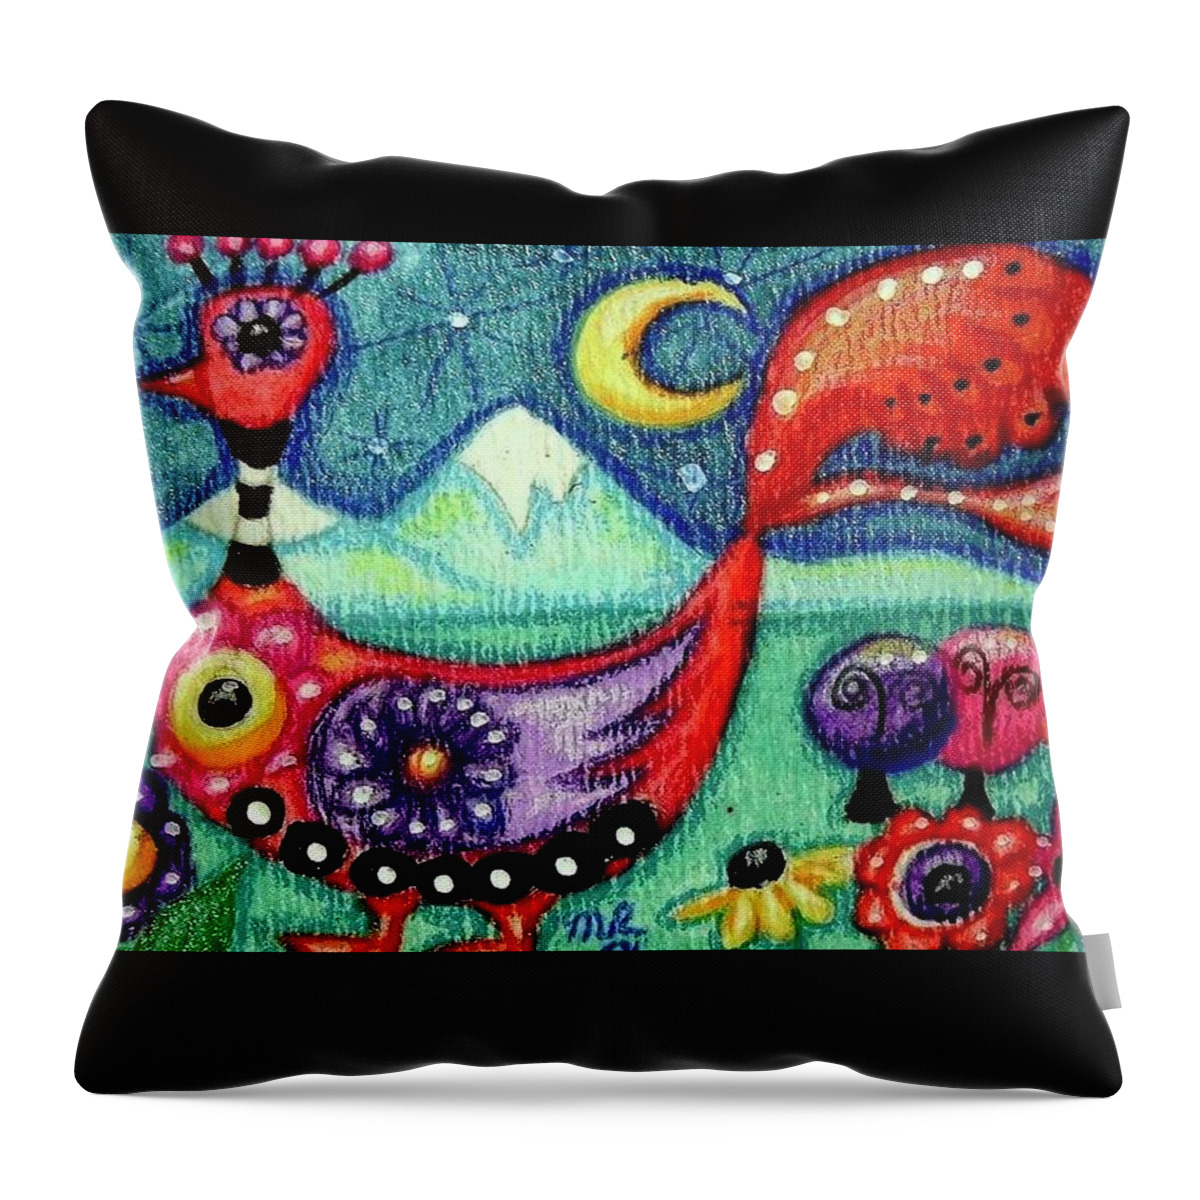 Whimsical Bird Painting Throw Pillow featuring the painting Whimsical Bird At Night by Monica Resinger